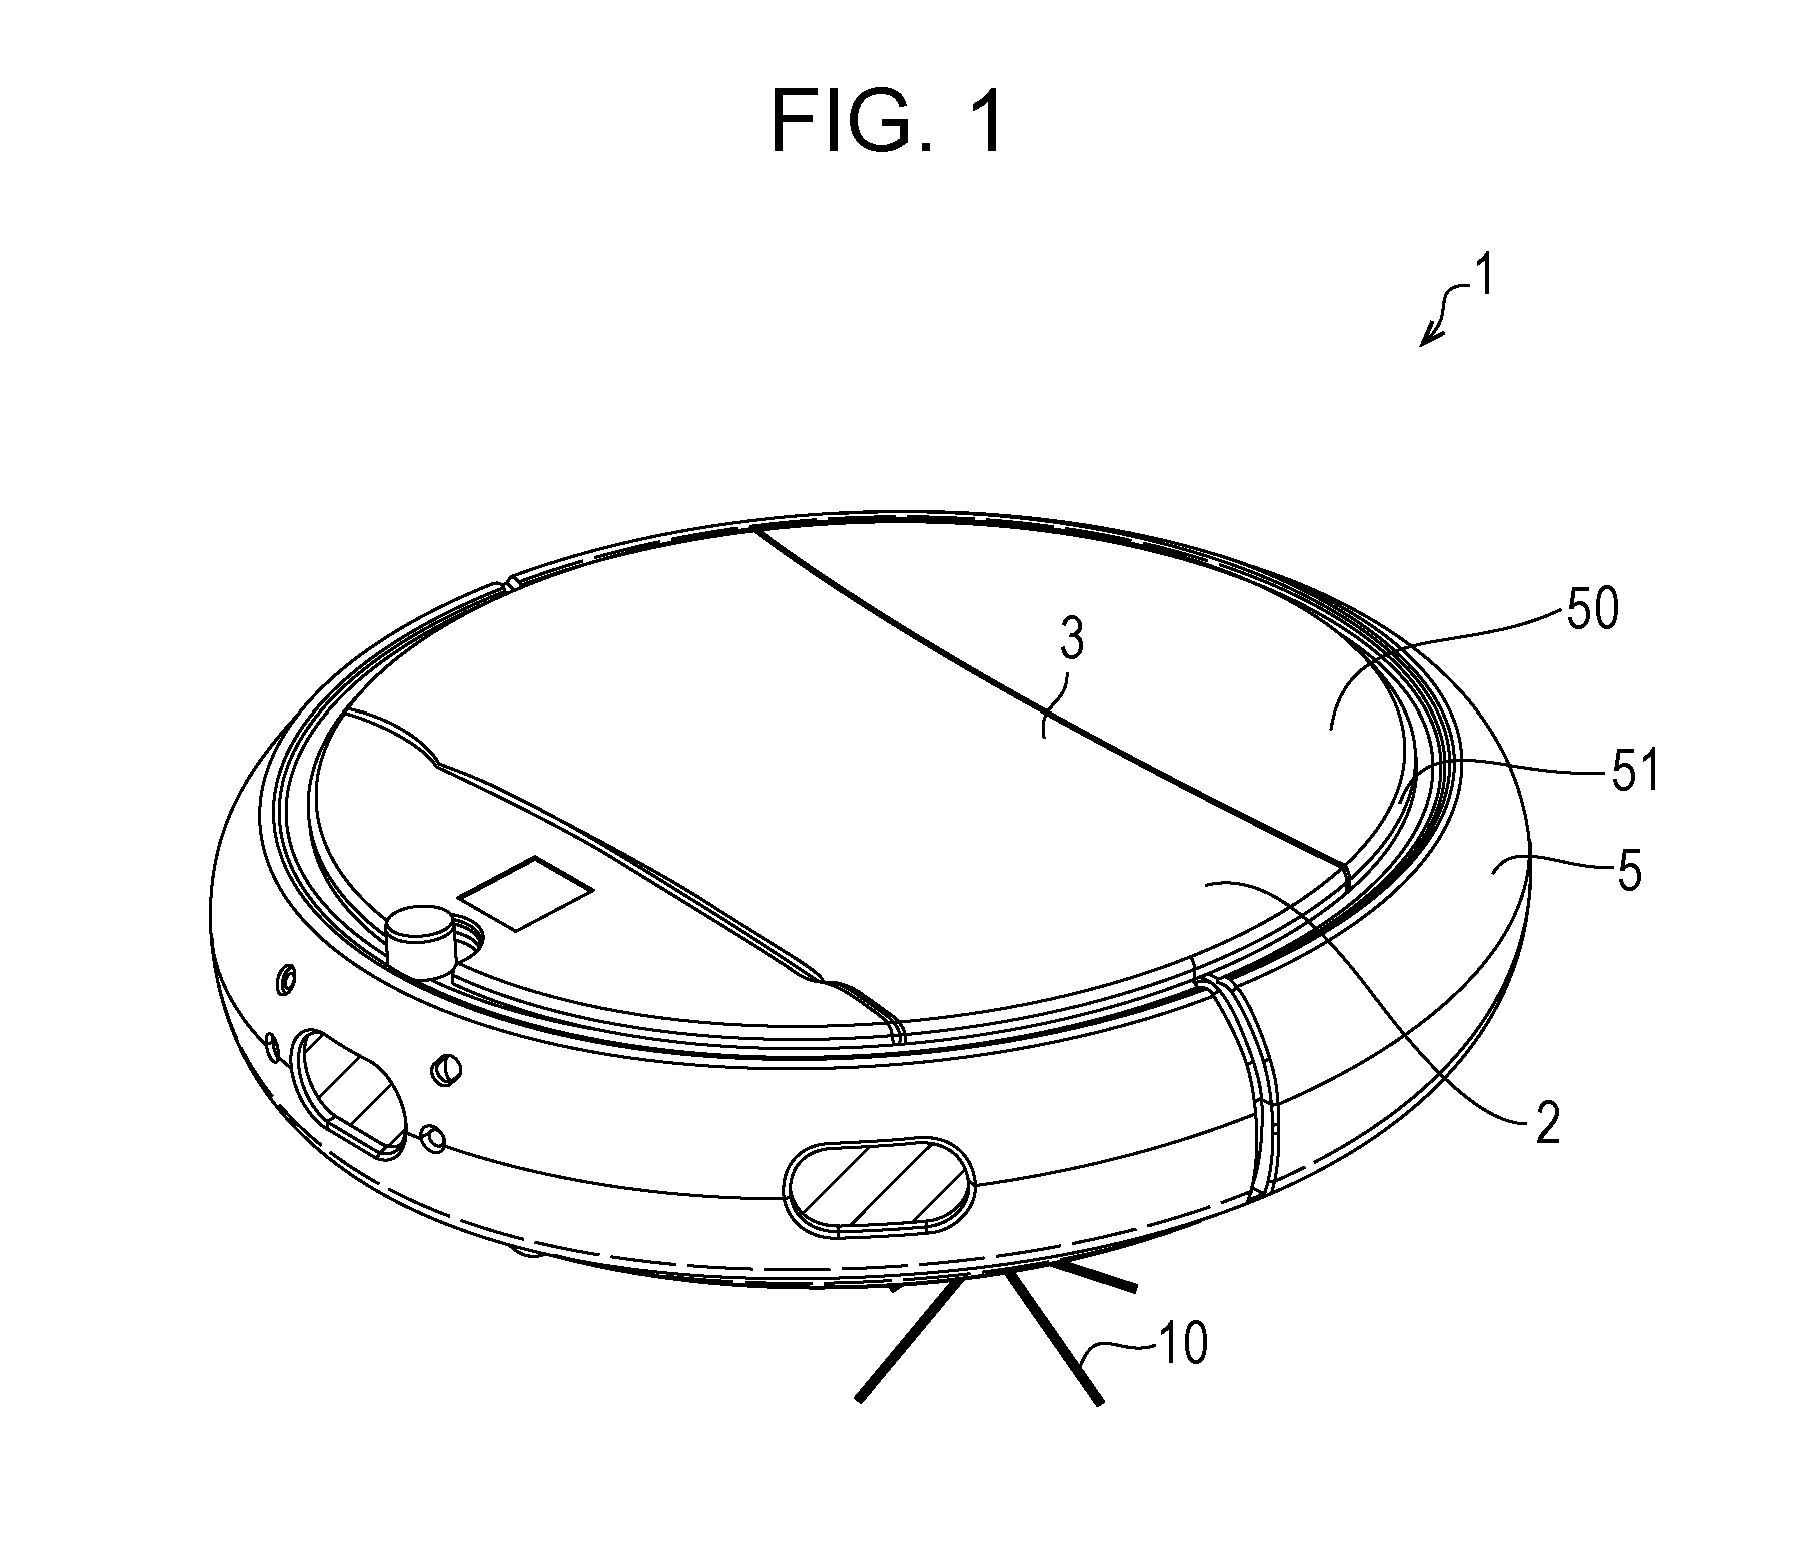 Self-propelled electronic device